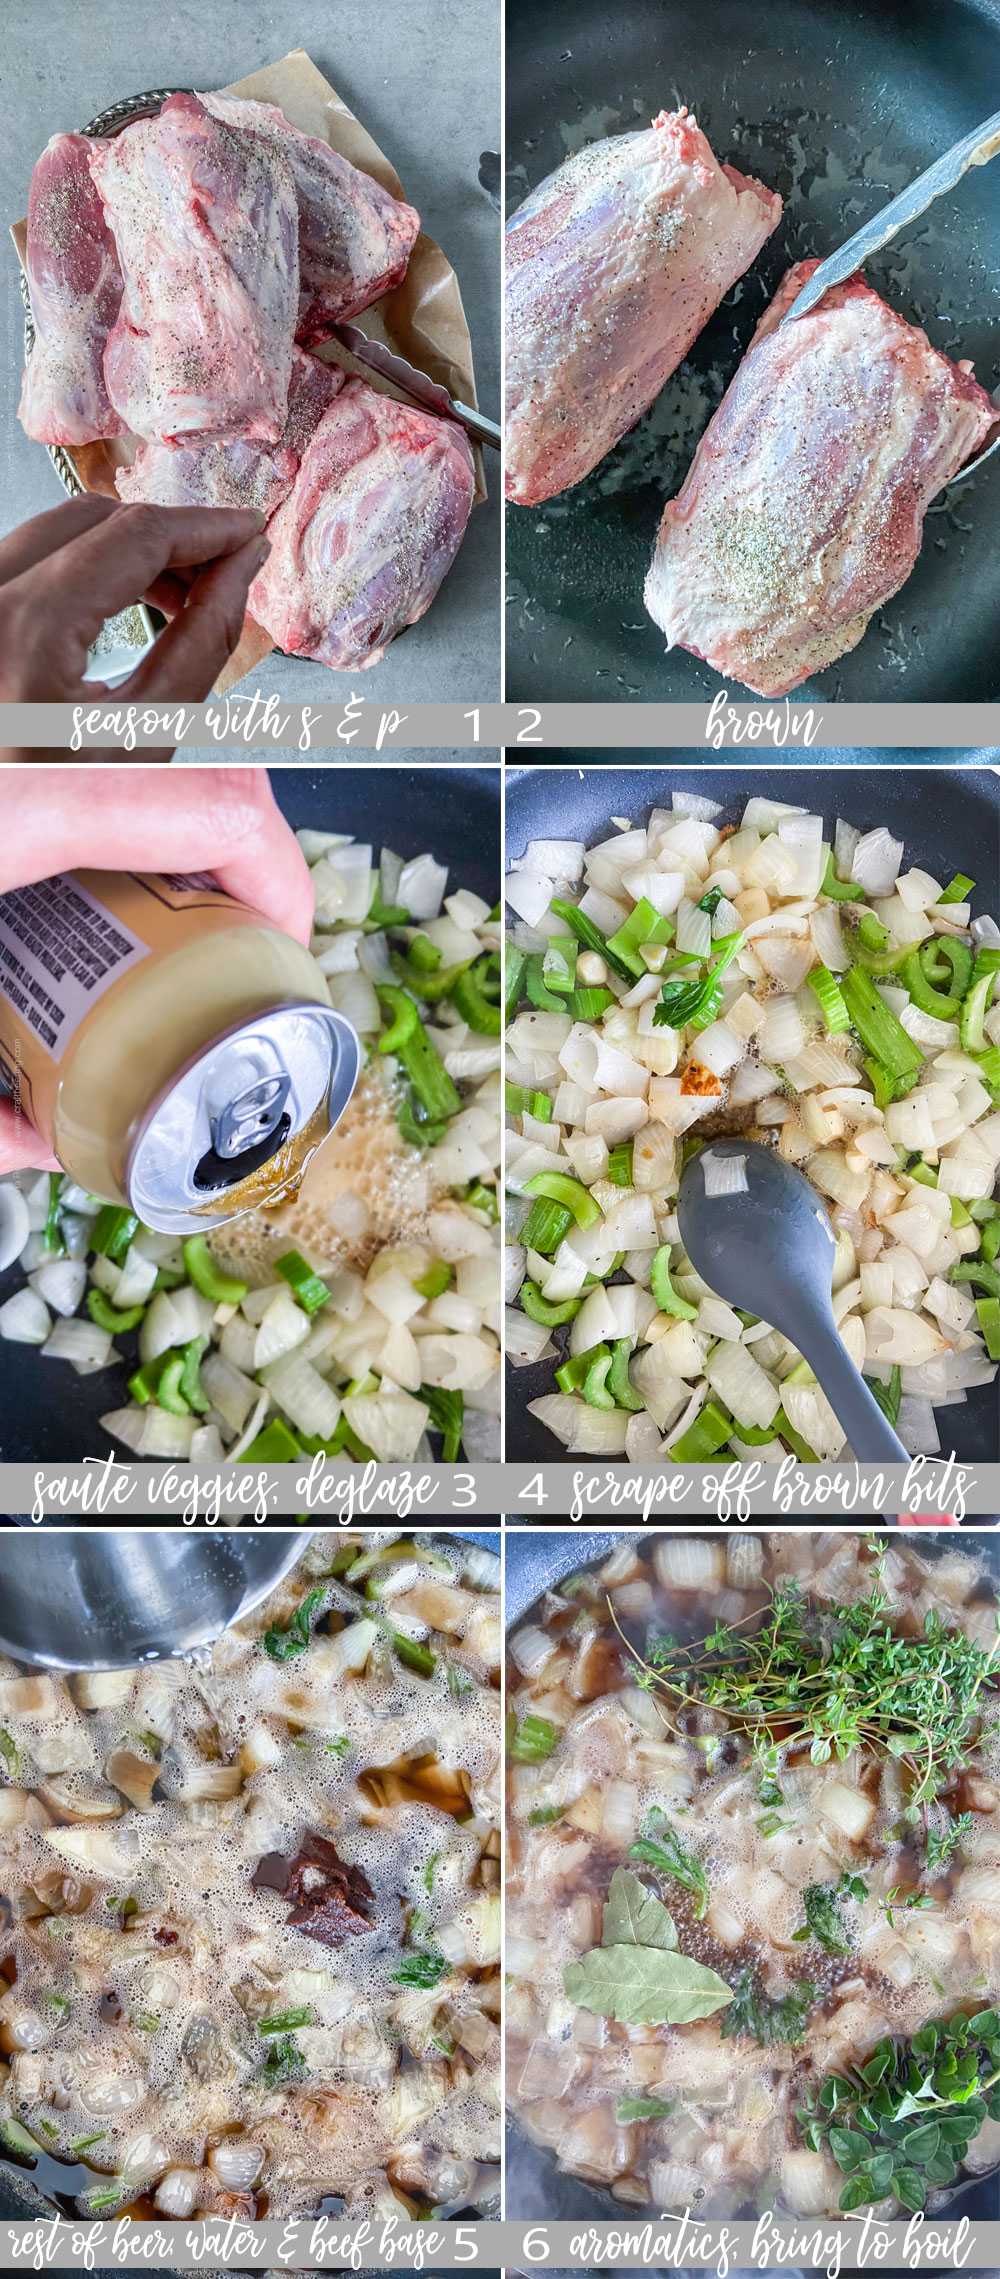 How to braise pork shanks in the oven - step by step image collage - part 1